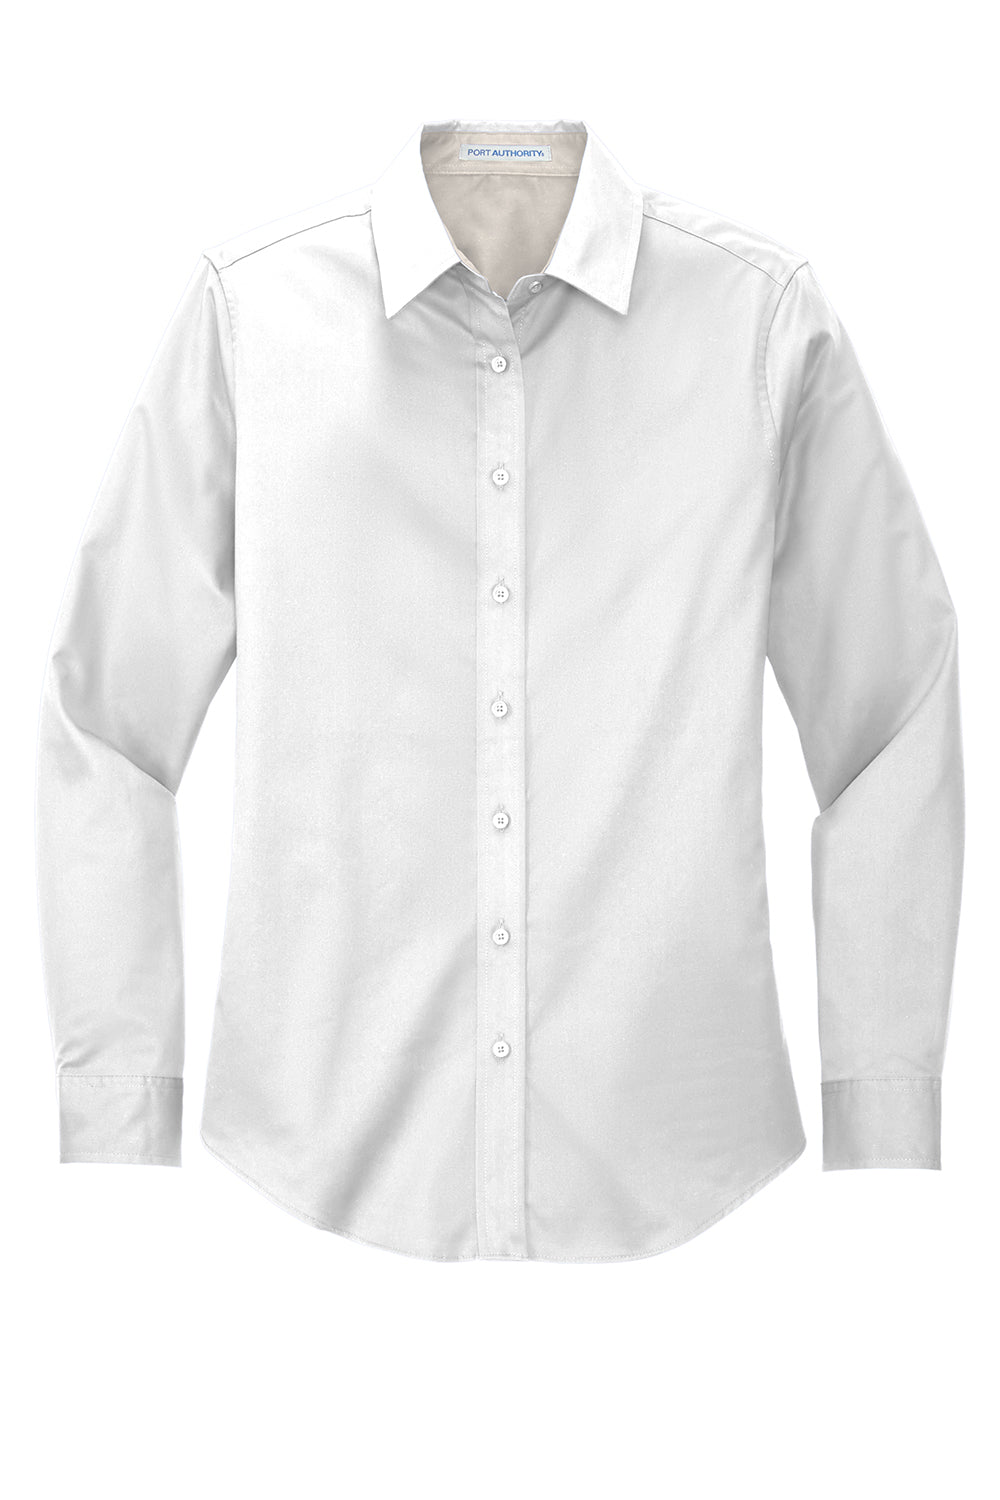 Port Authority L608 Womens Easy Care Wrinkle Resistant Long Sleeve Button Down Shirt White Flat Front